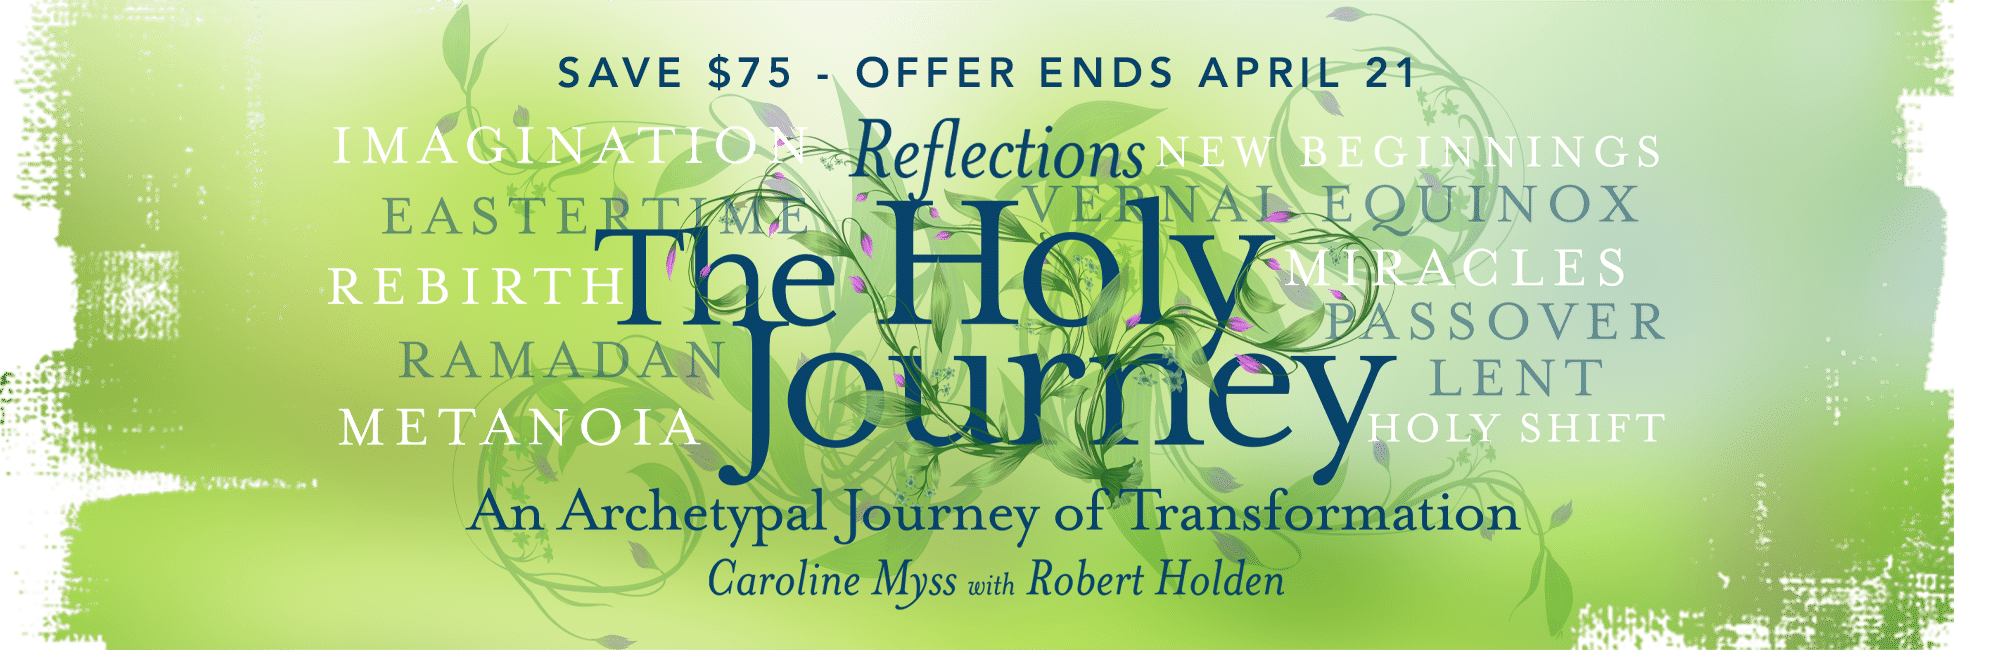 Save $75 - offer ends April 21. Reflections: The Holy Journey - An Archetypal Journey of Transformation. Caroline Myss with Robert Holden